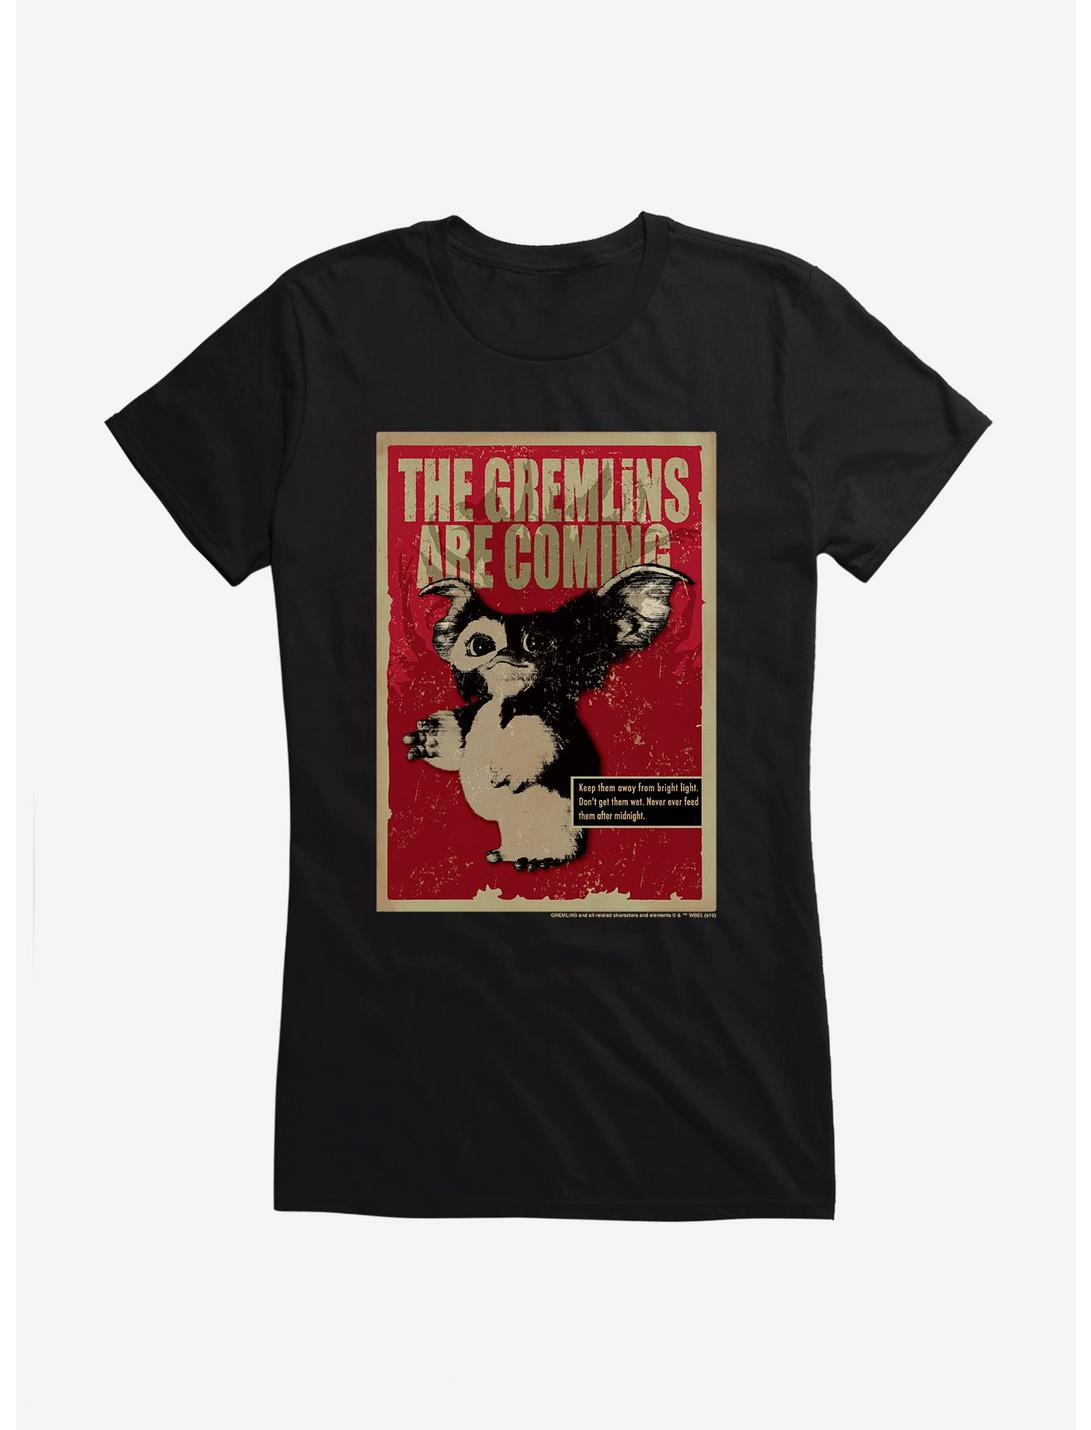 Gremlins They Are Coming Girls T-Shirt, BLACK, hi-res